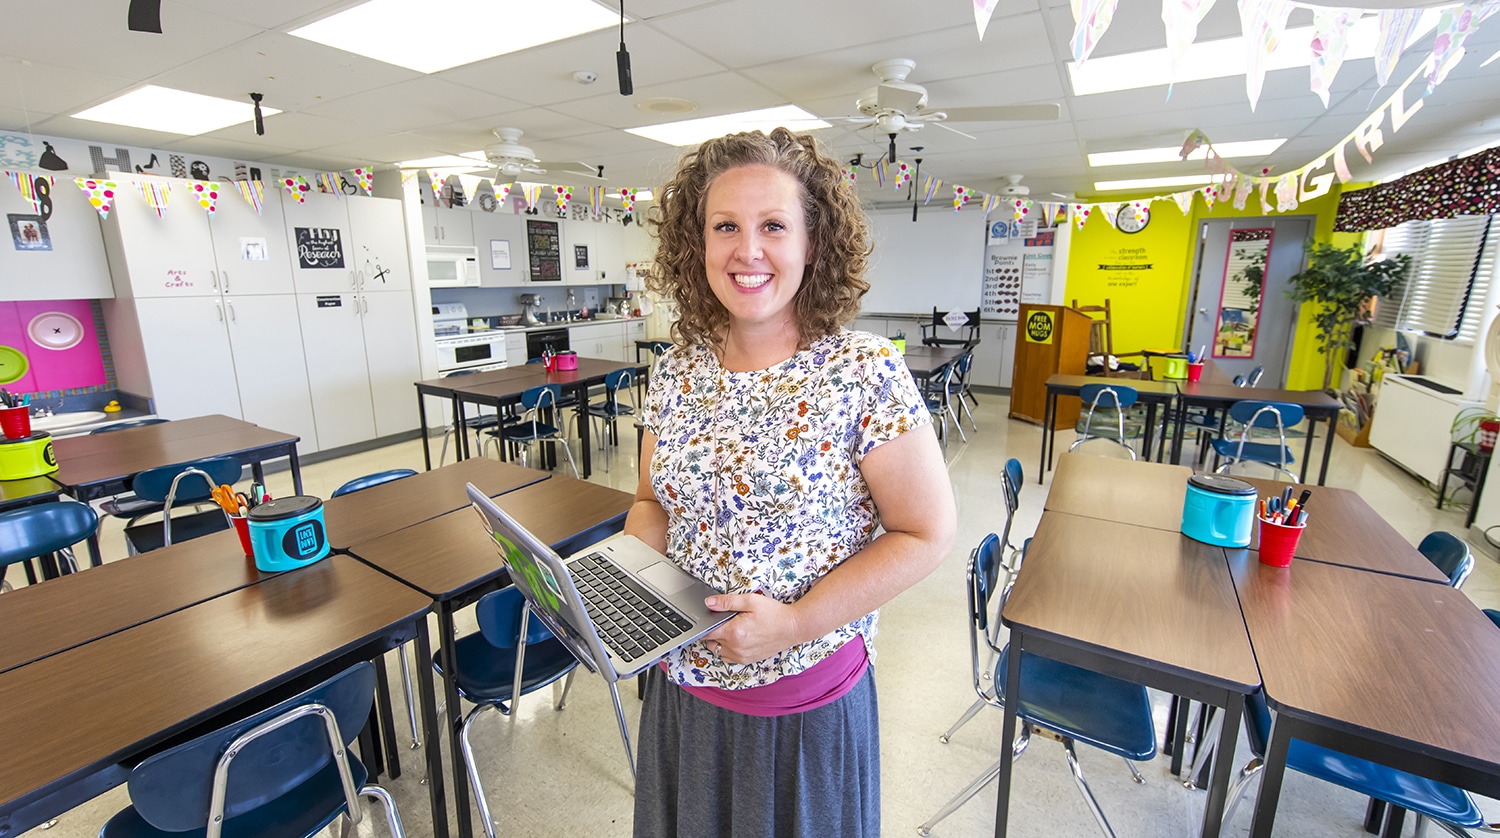 Courtney Dameron stands in her classroom, holding a laptop in her hand.